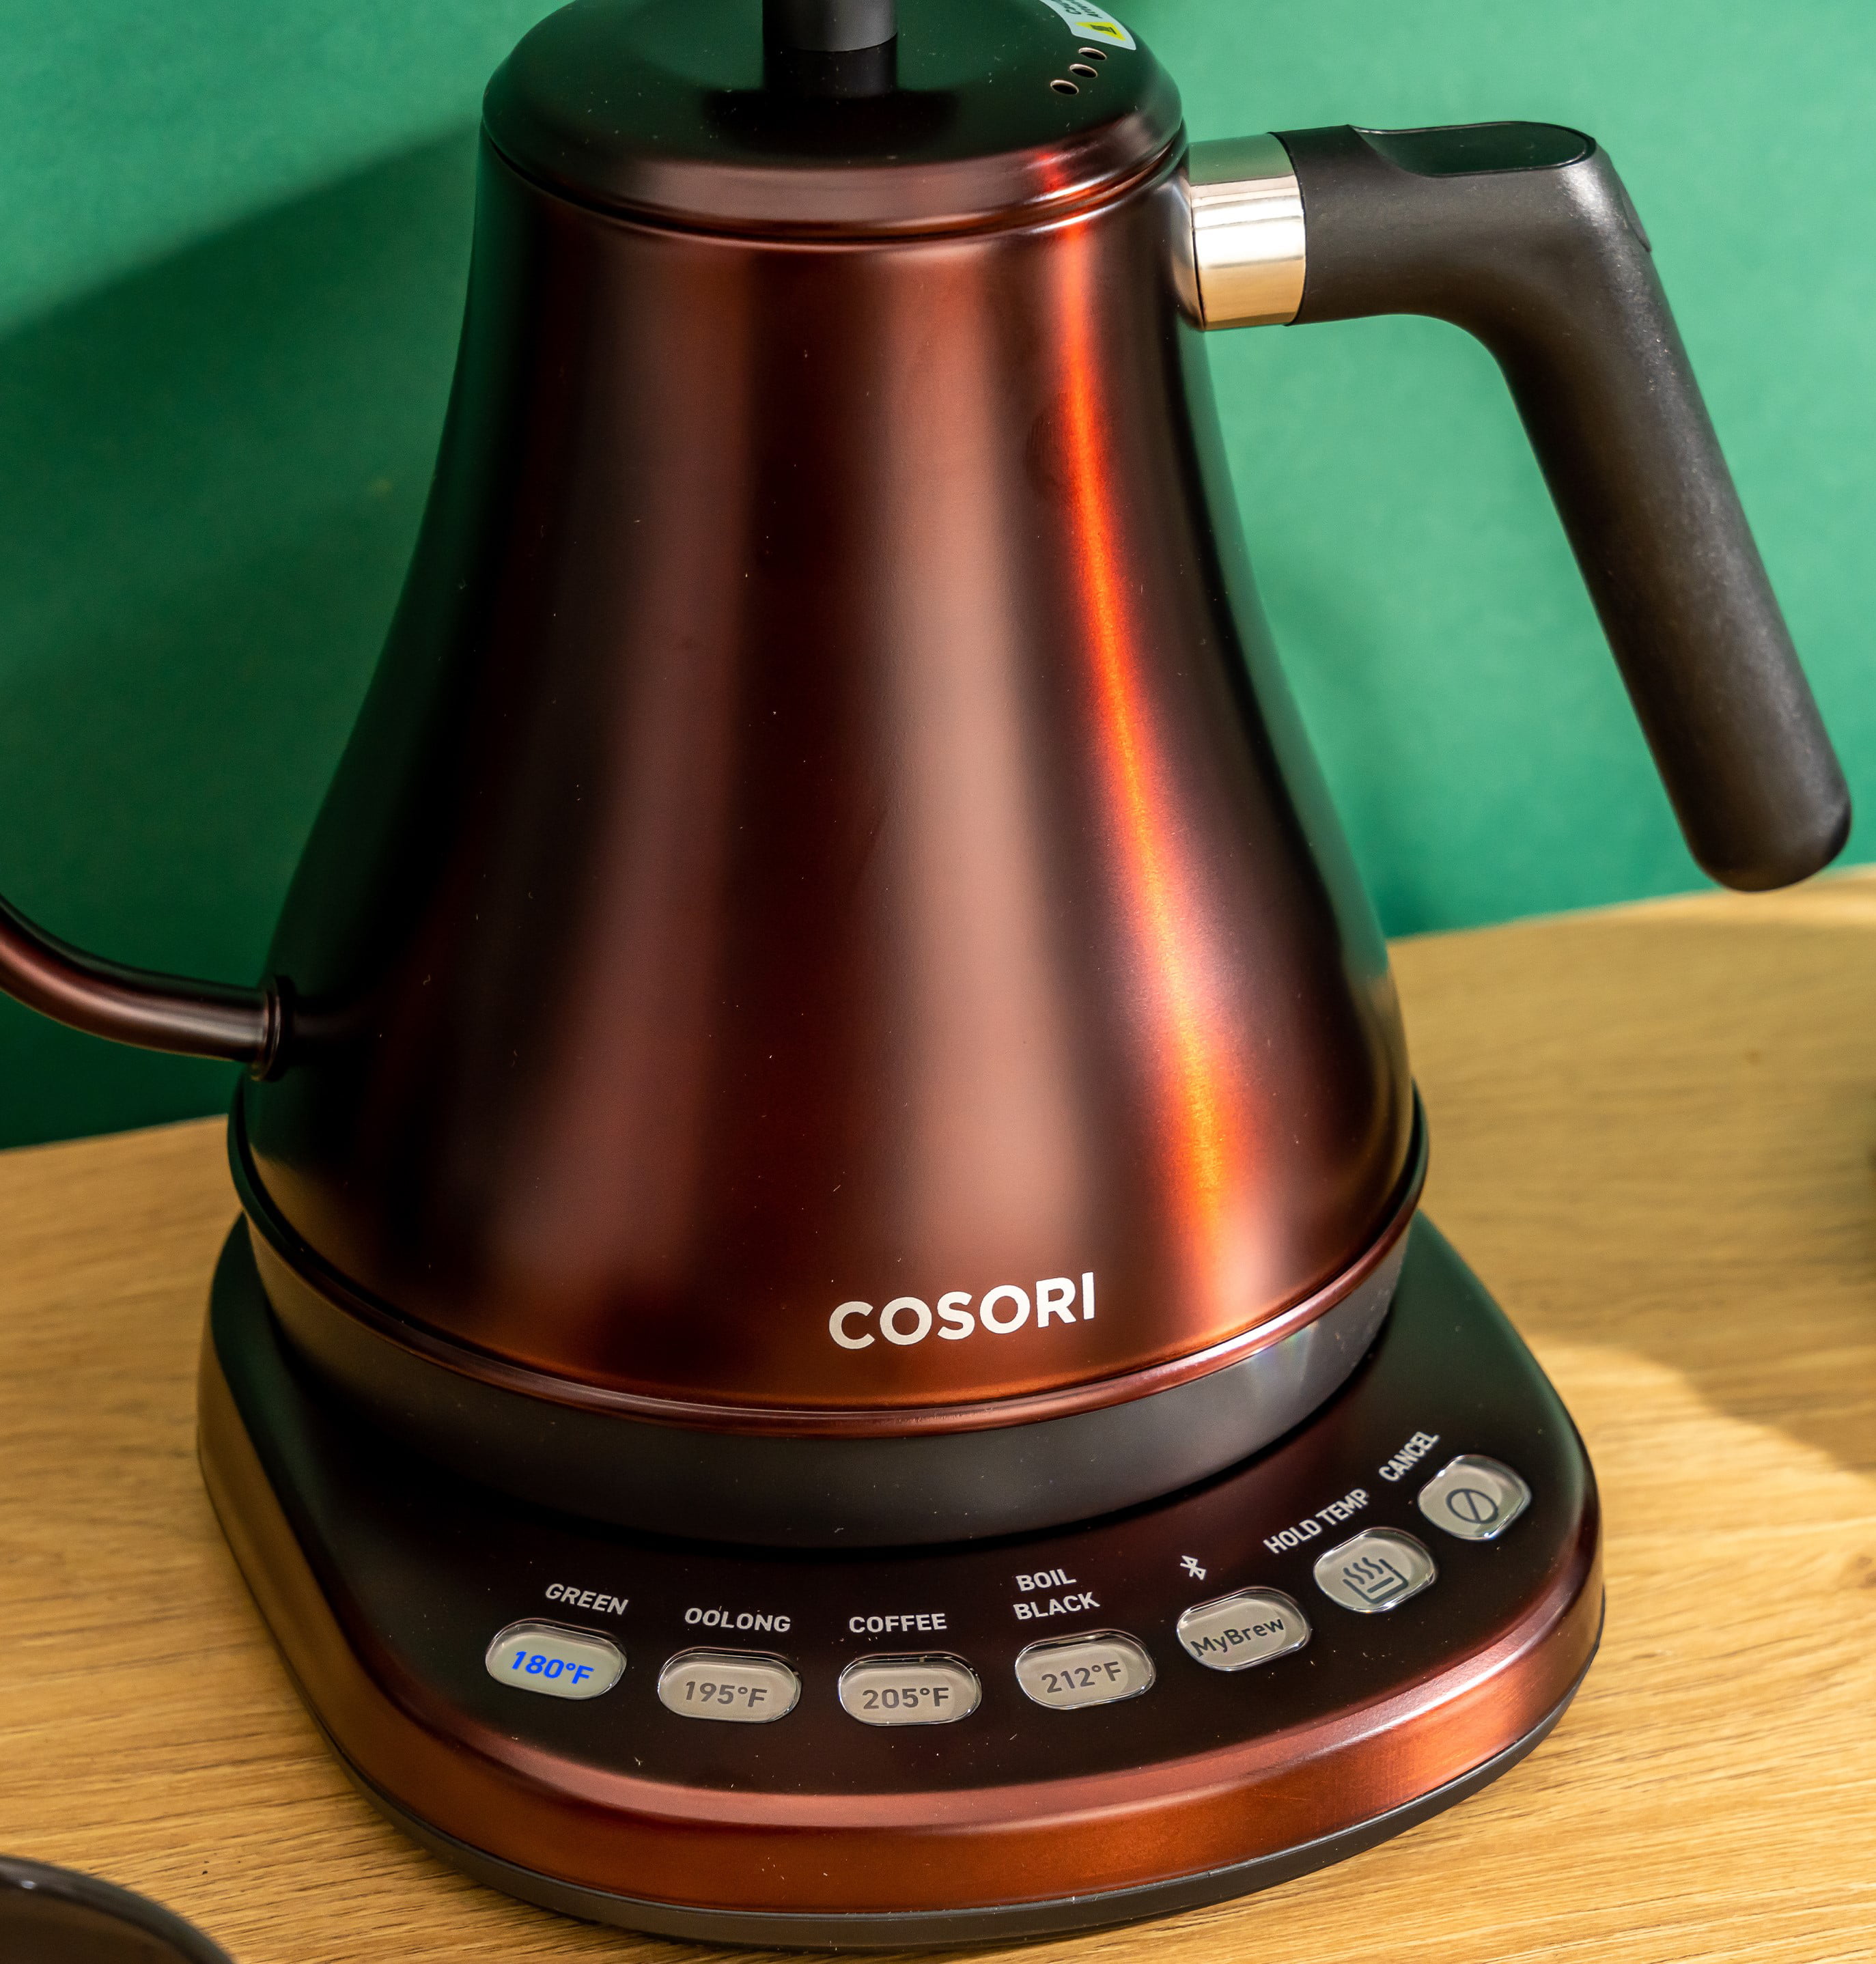 COSORI Electric Gooseneck Kettle Smart Bluetooth, Matte Black & Hario V60  Pour Over Starter Set with Coffee Dripper, Pot, Scoop and Filters, Size 02